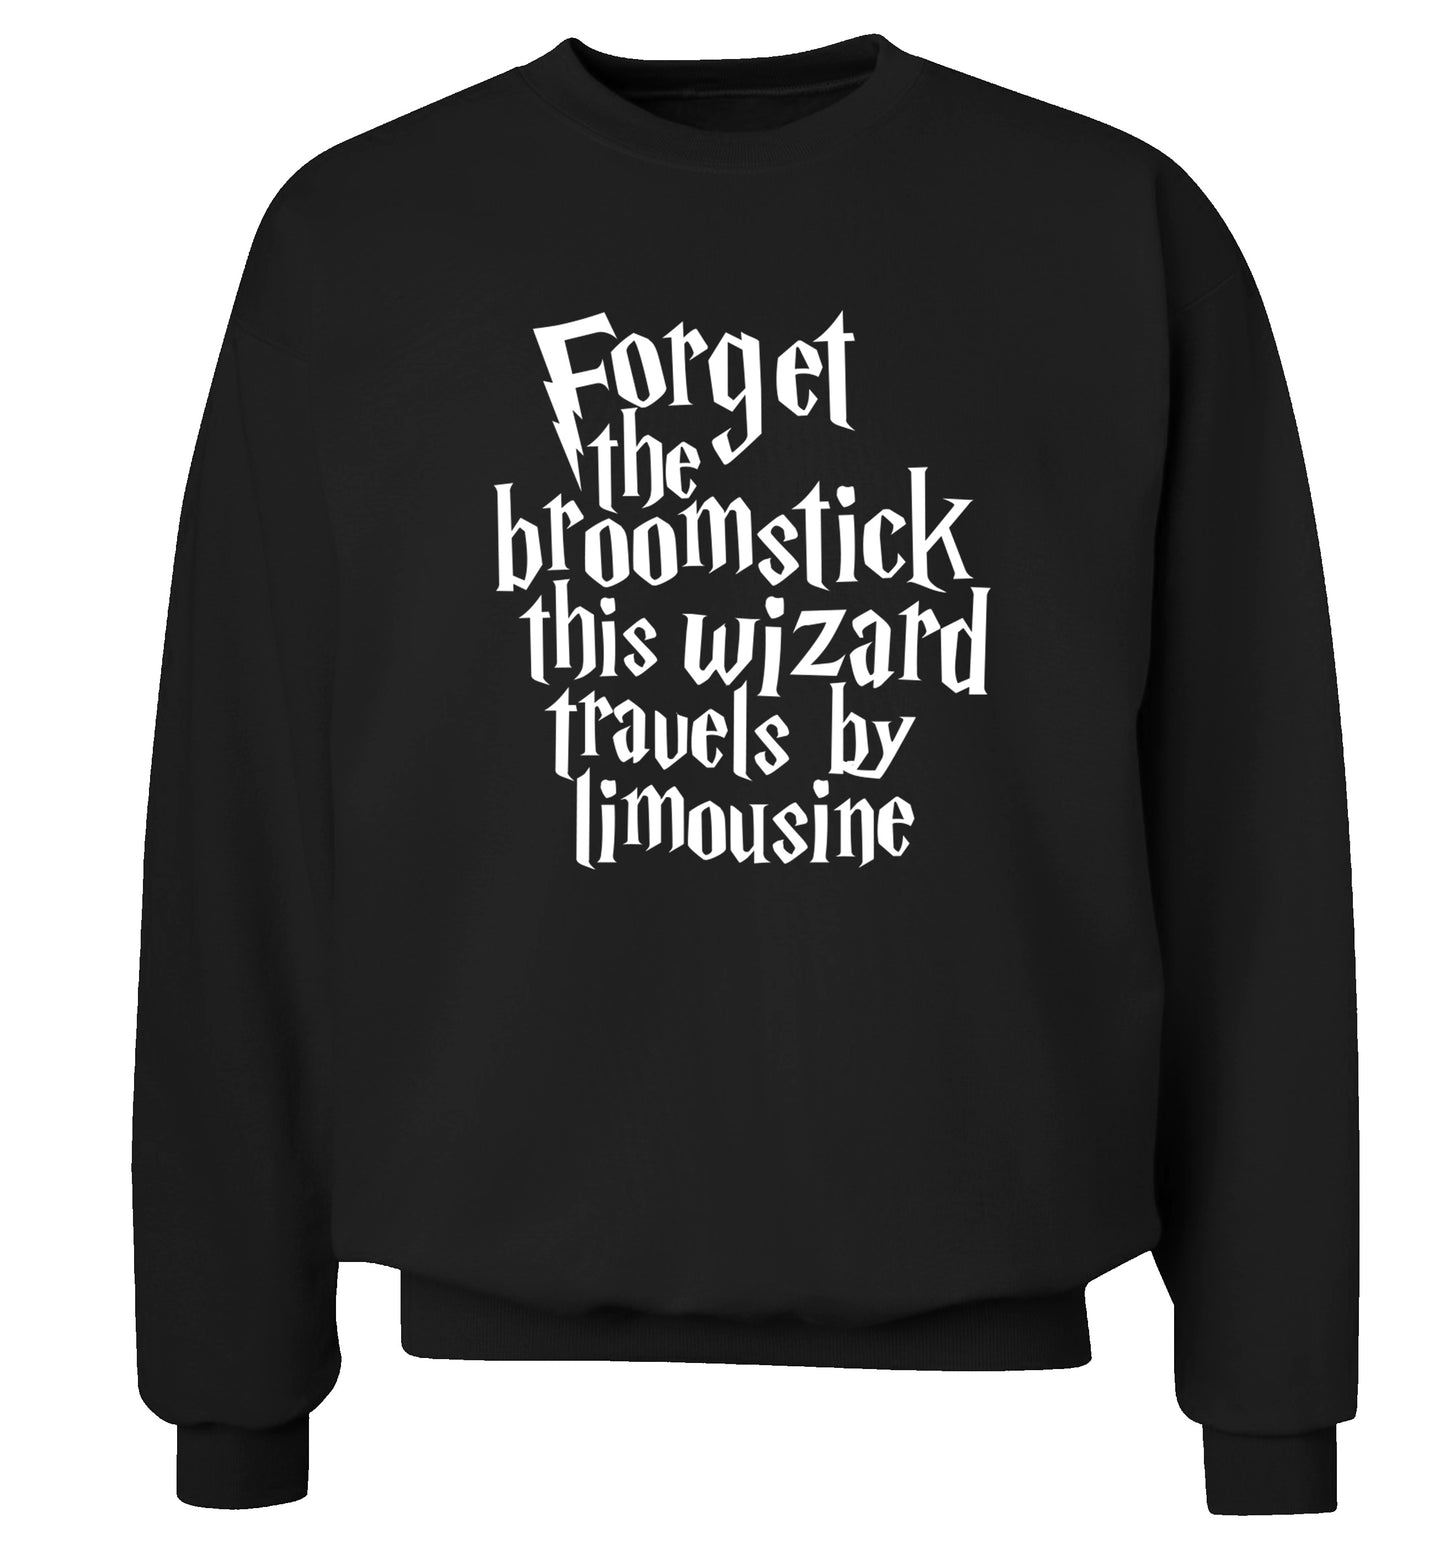 Forget the broomstick this wizard travels by limousine Adult's unisexblack Sweater 2XL